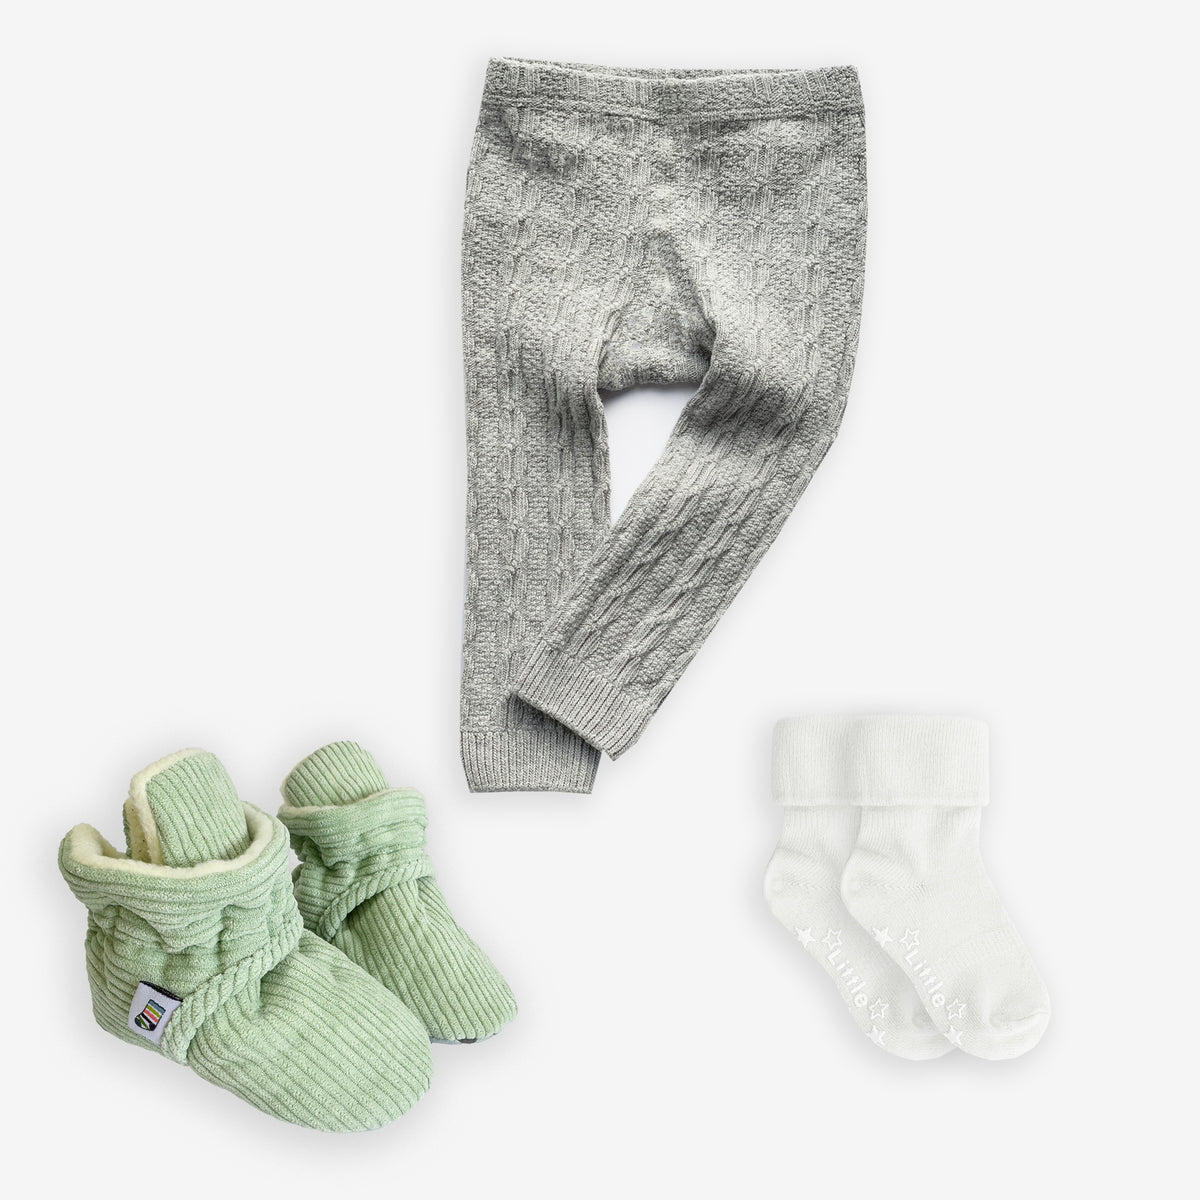 Non-Slip, Stay-on Bootie Bundle + Stay-on Socks + Cable Knit Leggings - Pistachio Corduroy